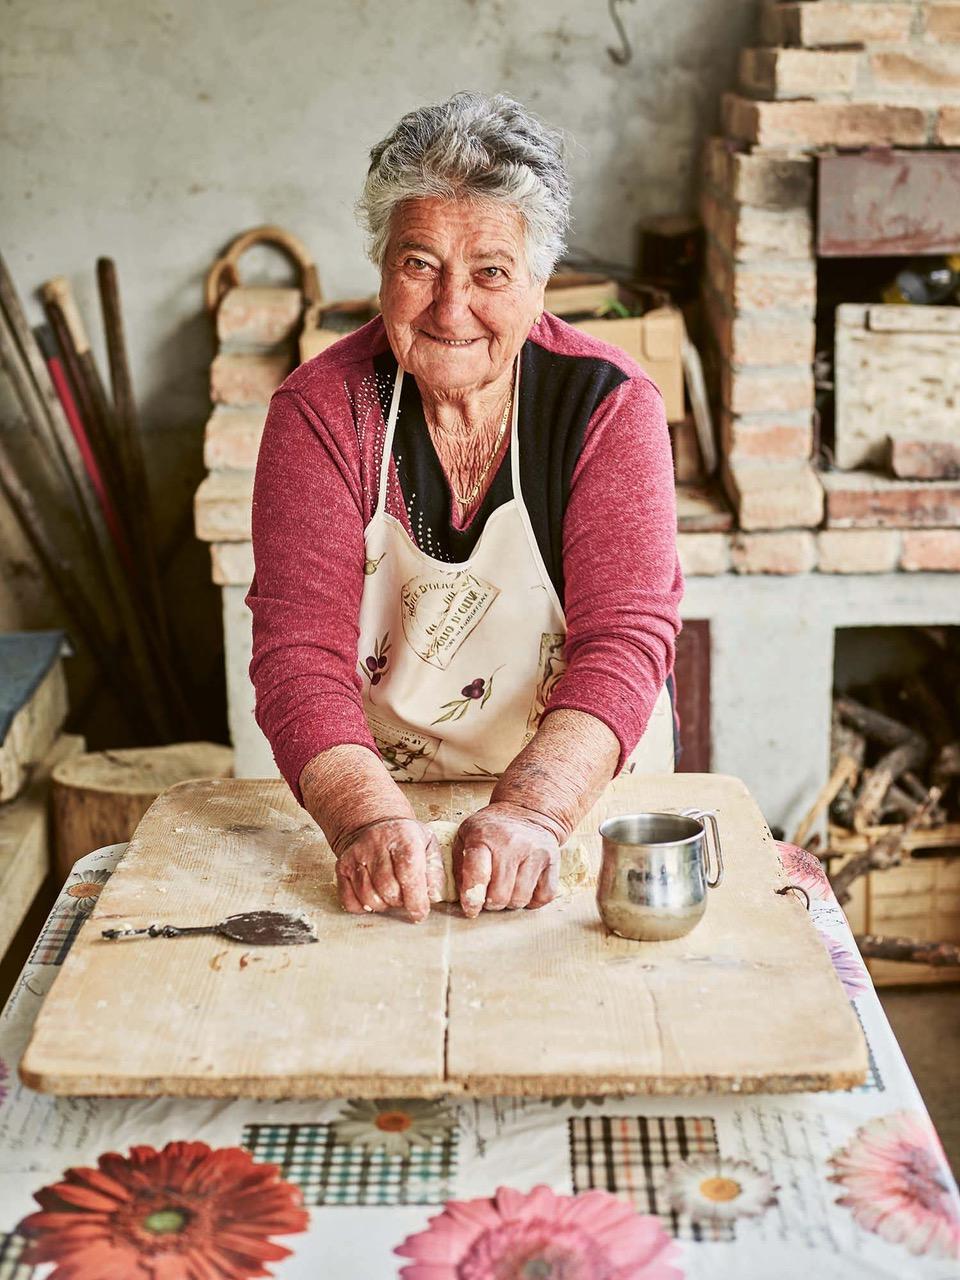 Maria, a farmer from Basilicata, kneads dough to make raschiatelli, a local pasta she has been making since she was 8-years-old. She'll dress the pasta with homemade olive oil and peperone di Senise from her garden. (Emma Lee)